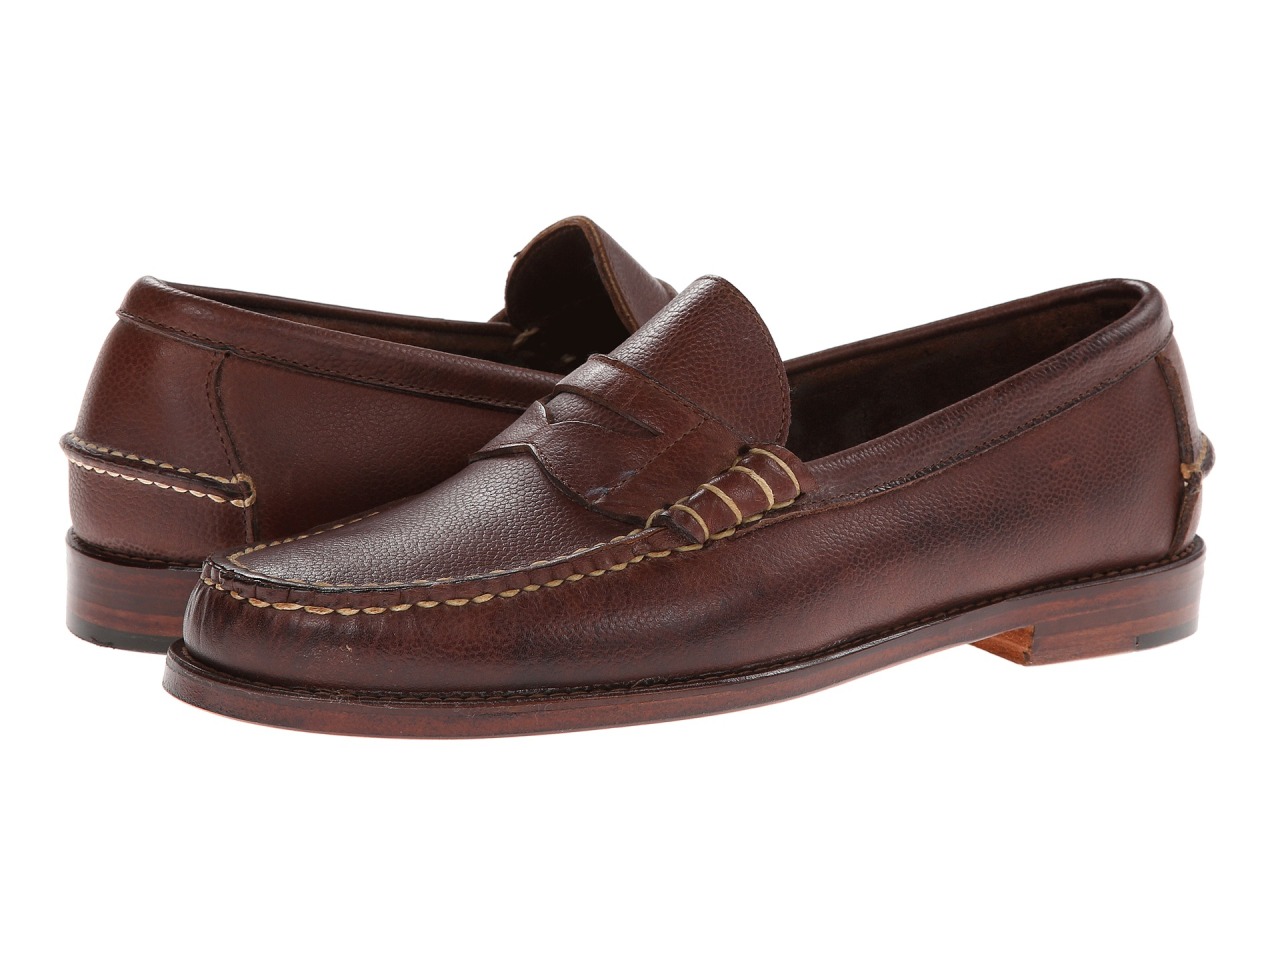 bass weejuns loafers sale